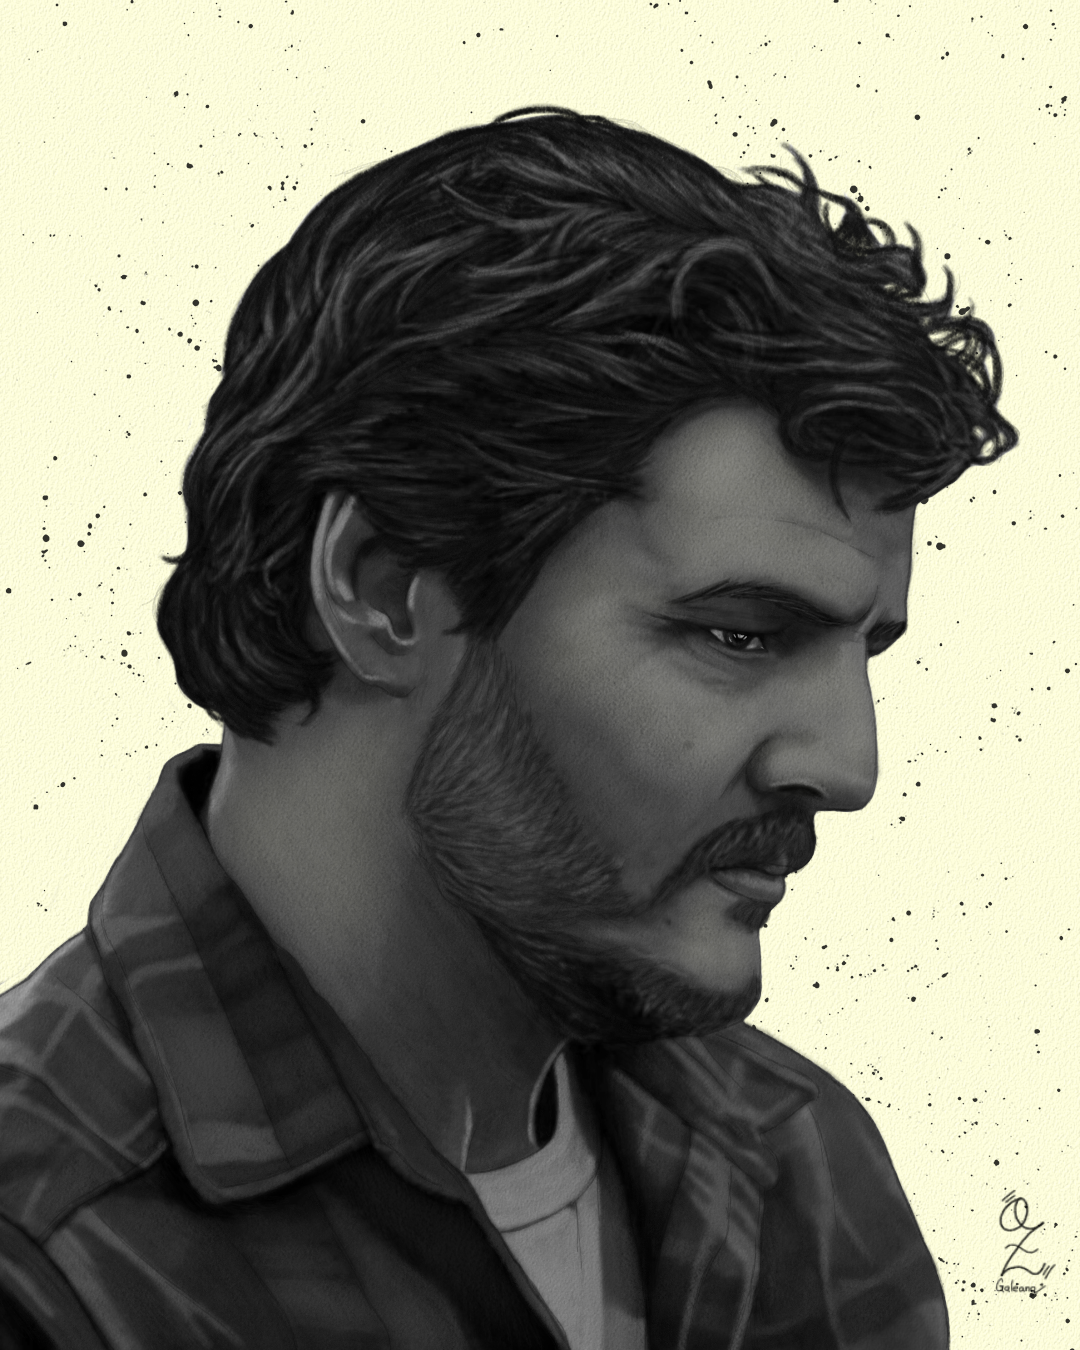 Joel The Last of Us Drawing by Oz Galeano by Oz Galeano on Dribbble